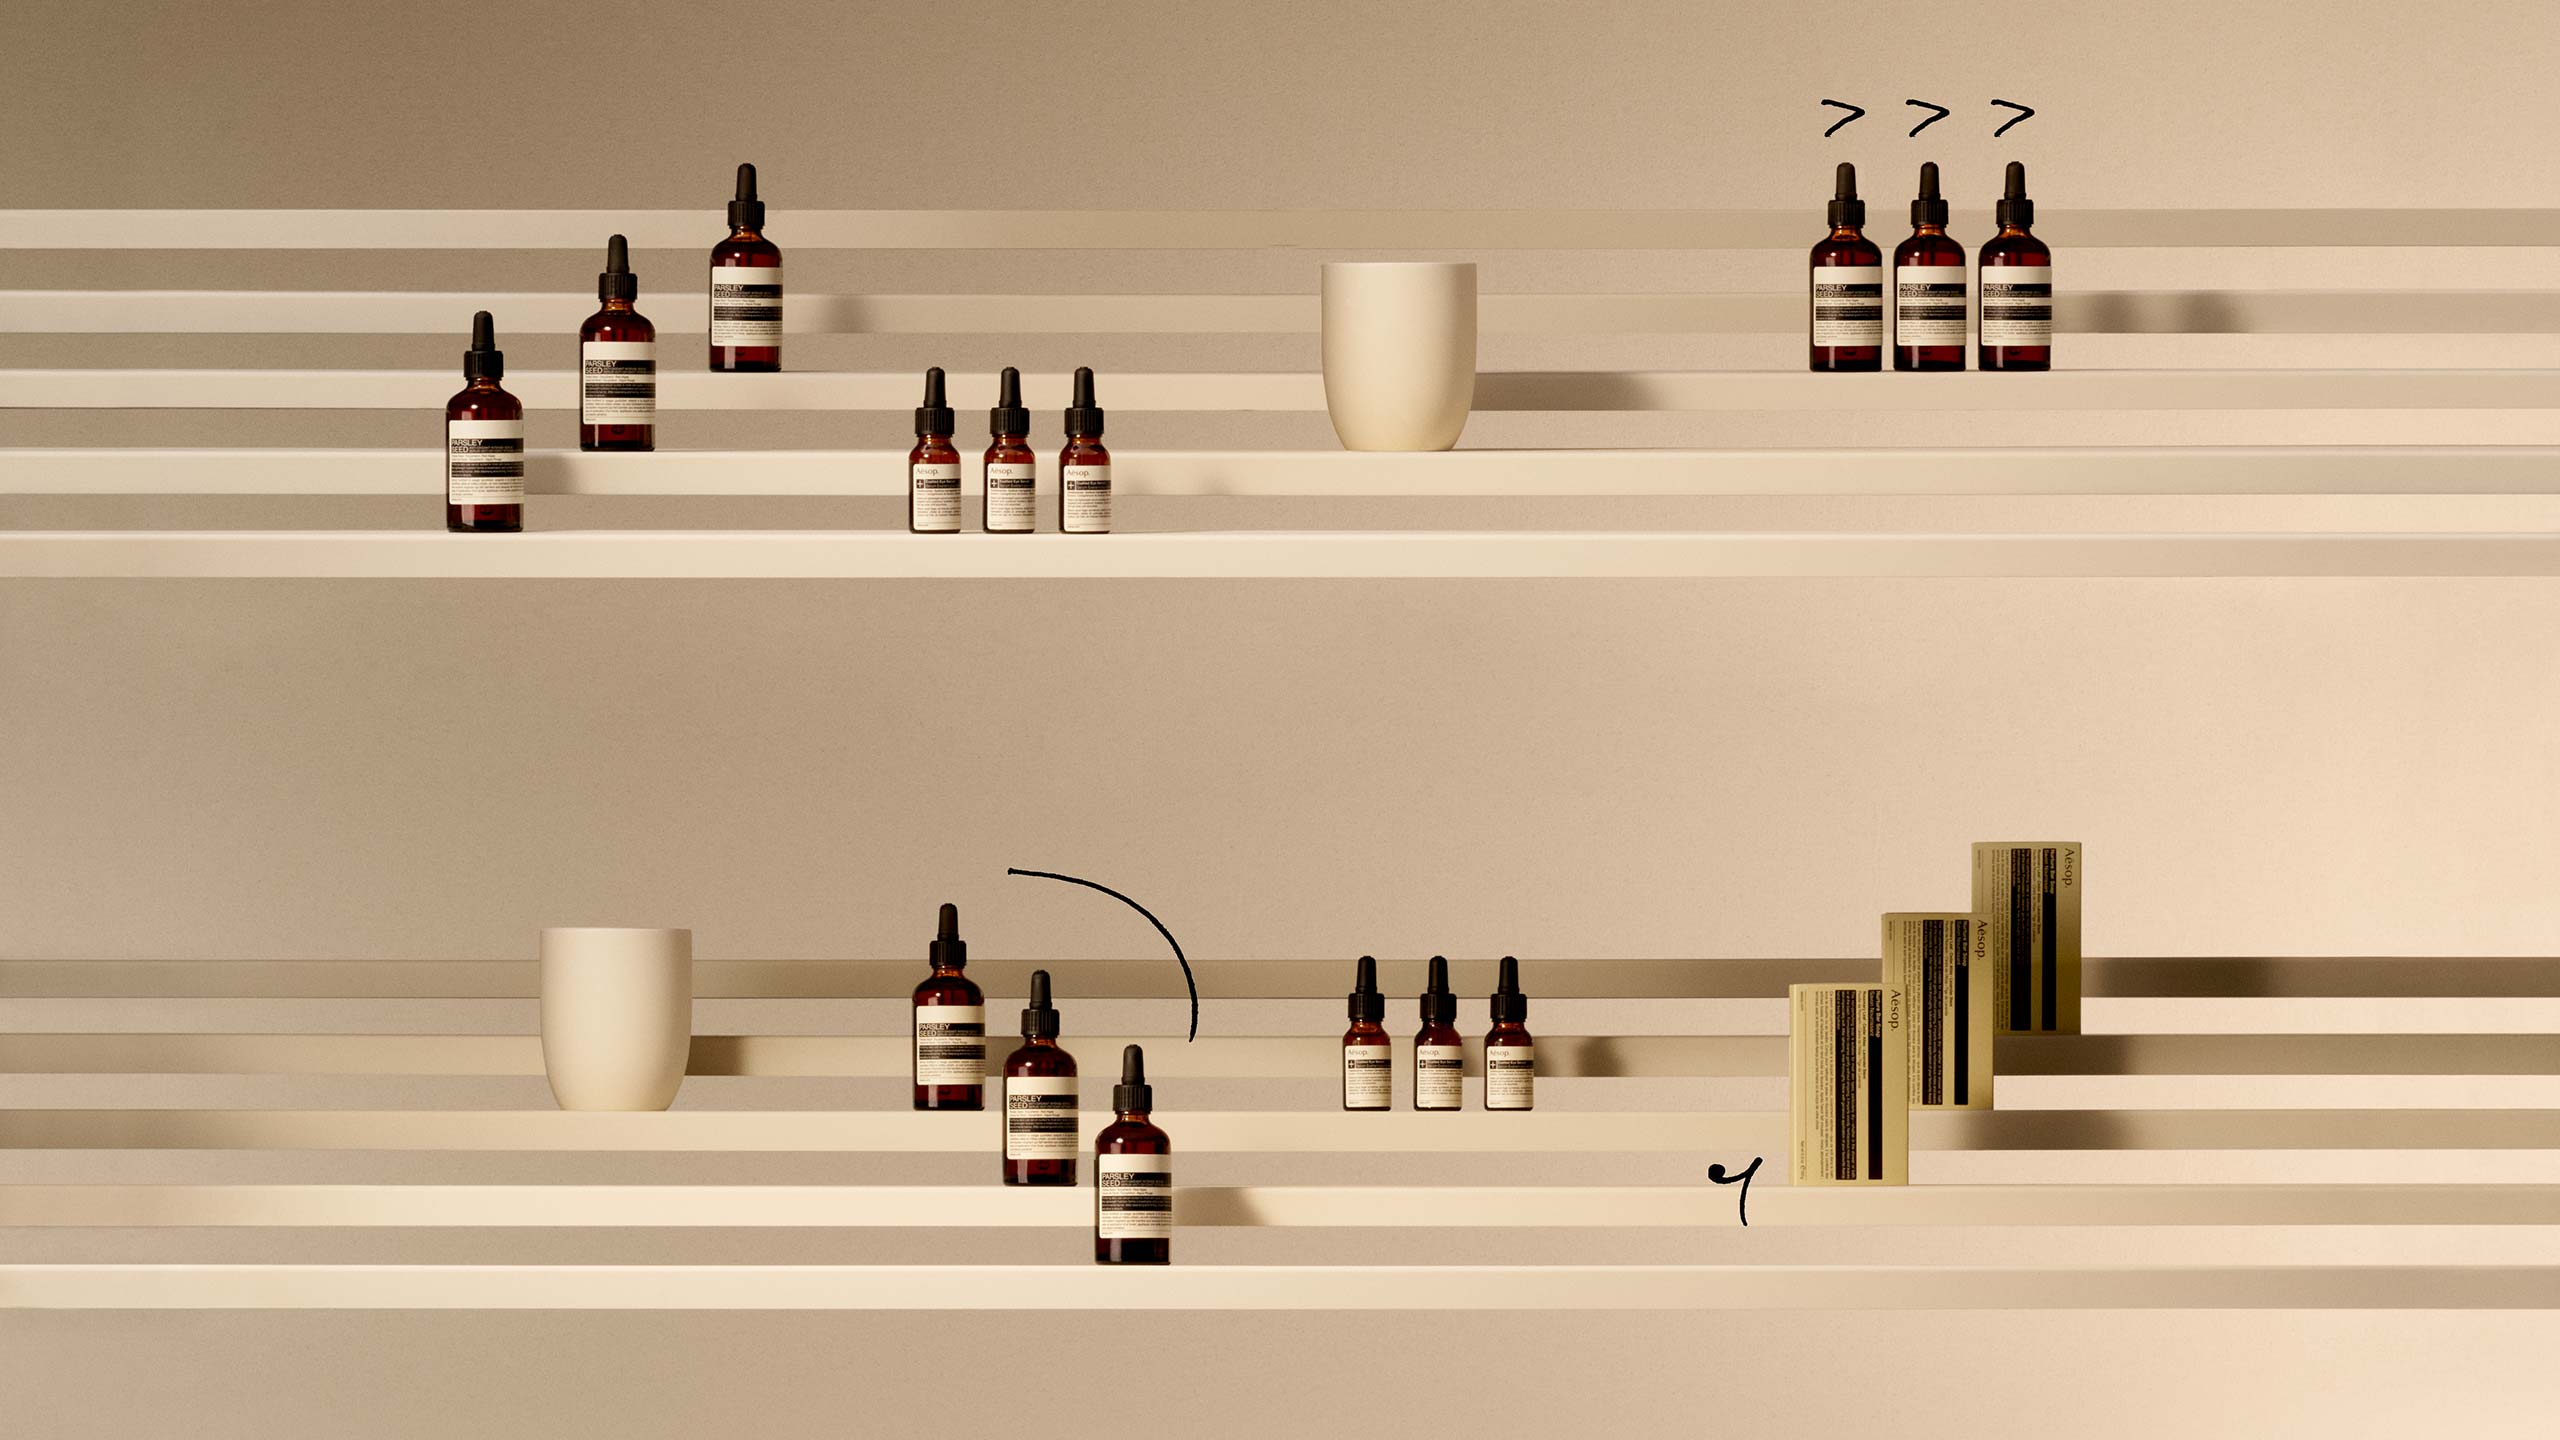 Aesop products and music notes placed on white stairs in beige background 